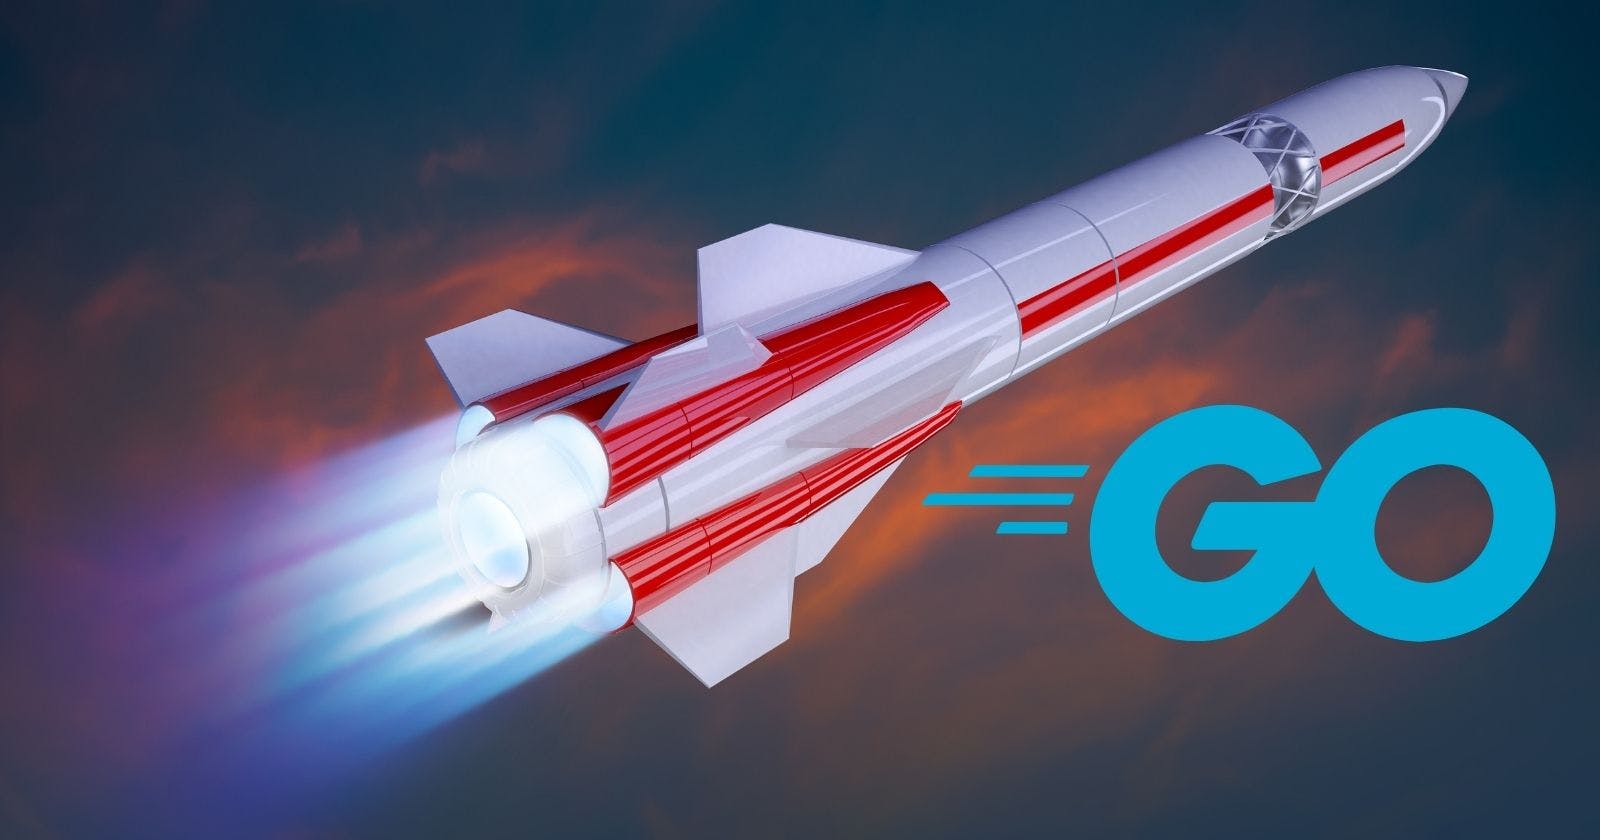 Bleve: How to build a rocket-fast search engine?